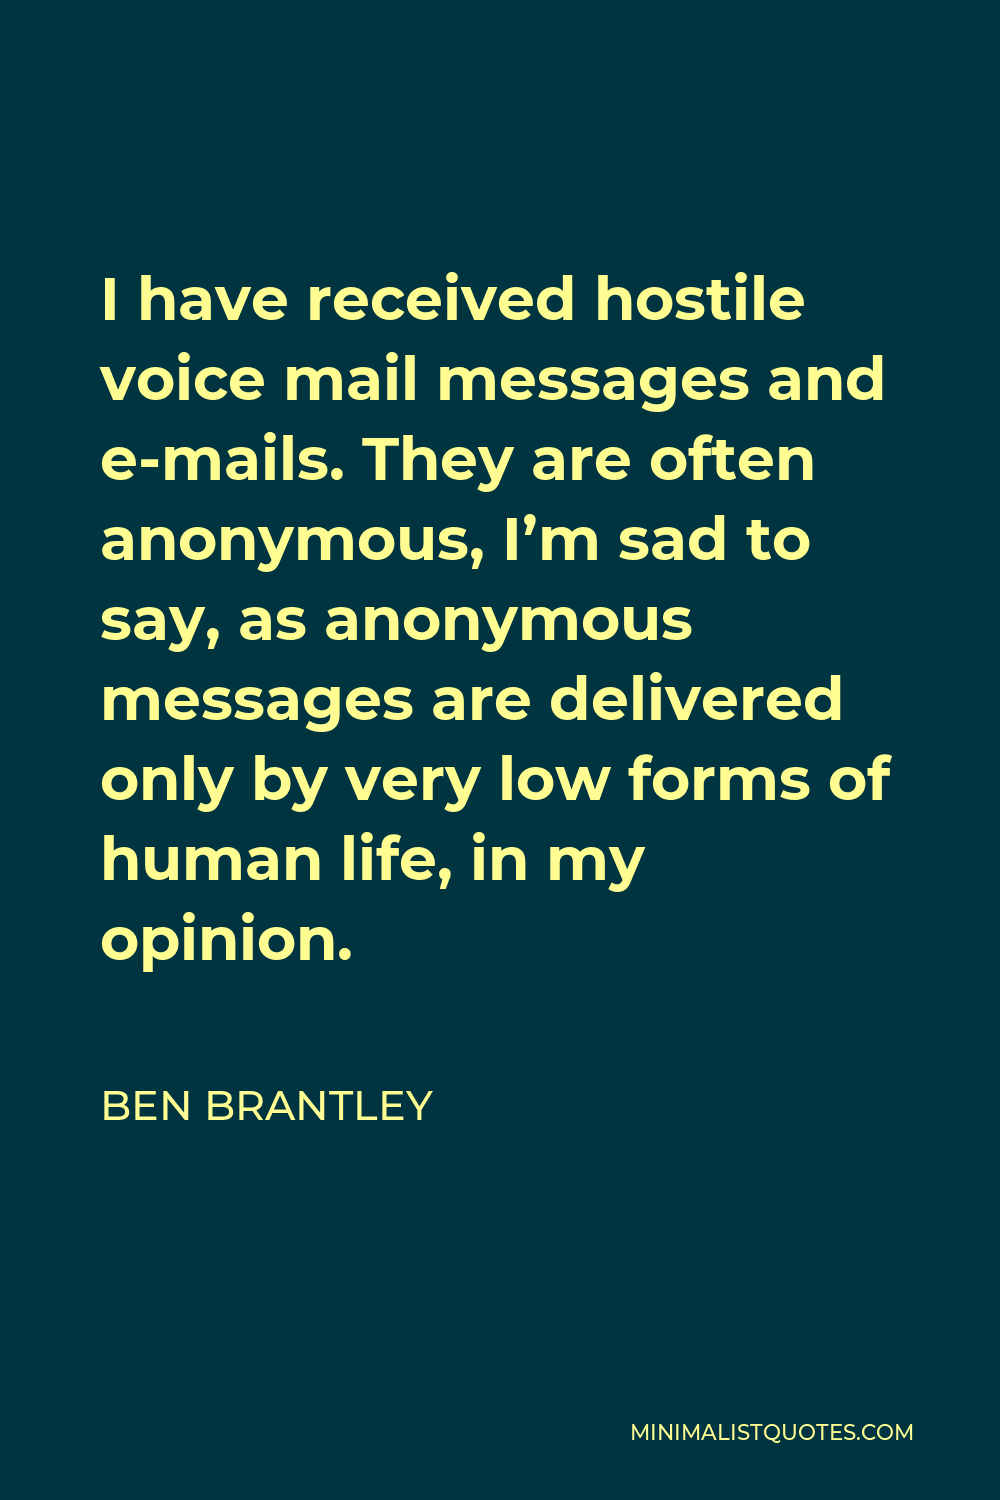 Ben Brantley Quote - I have received hostile voice mail messages and e-mails. They are often anonymous, I’m sad to say, as anonymous messages are delivered only by very low forms of human life, in my opinion.